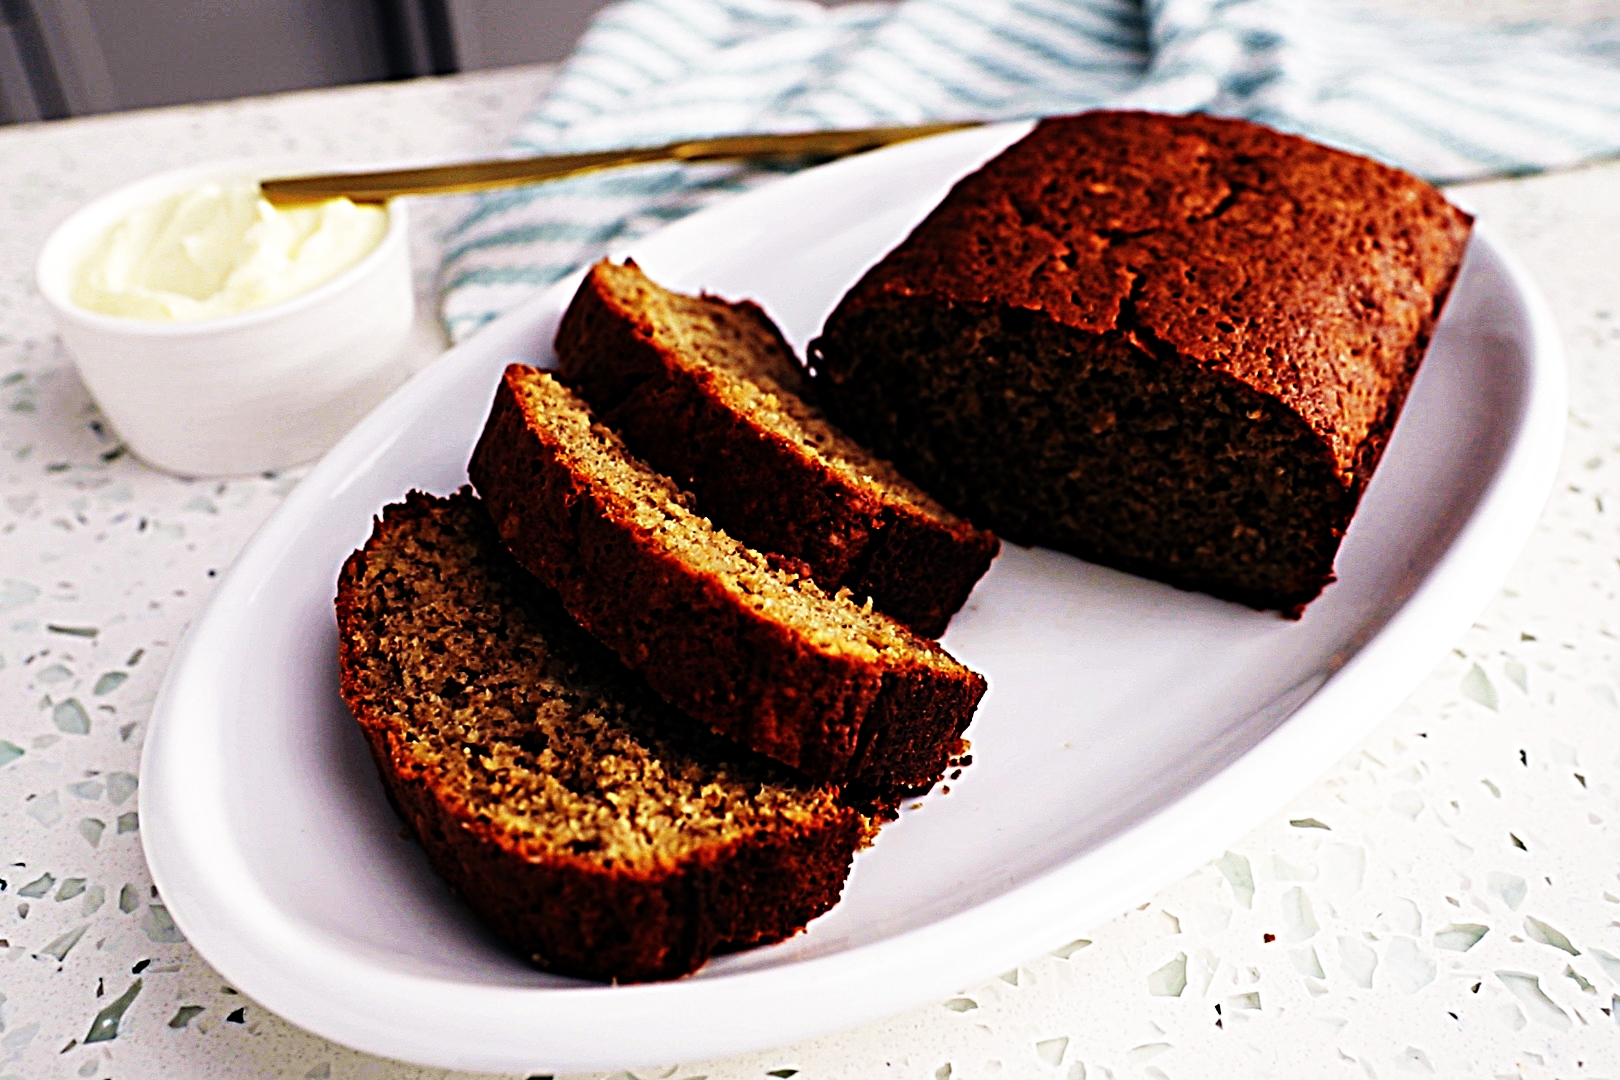 Stupid-Easy Recipe for Gluten-Free Banana Bread (#1 Top-Rated)